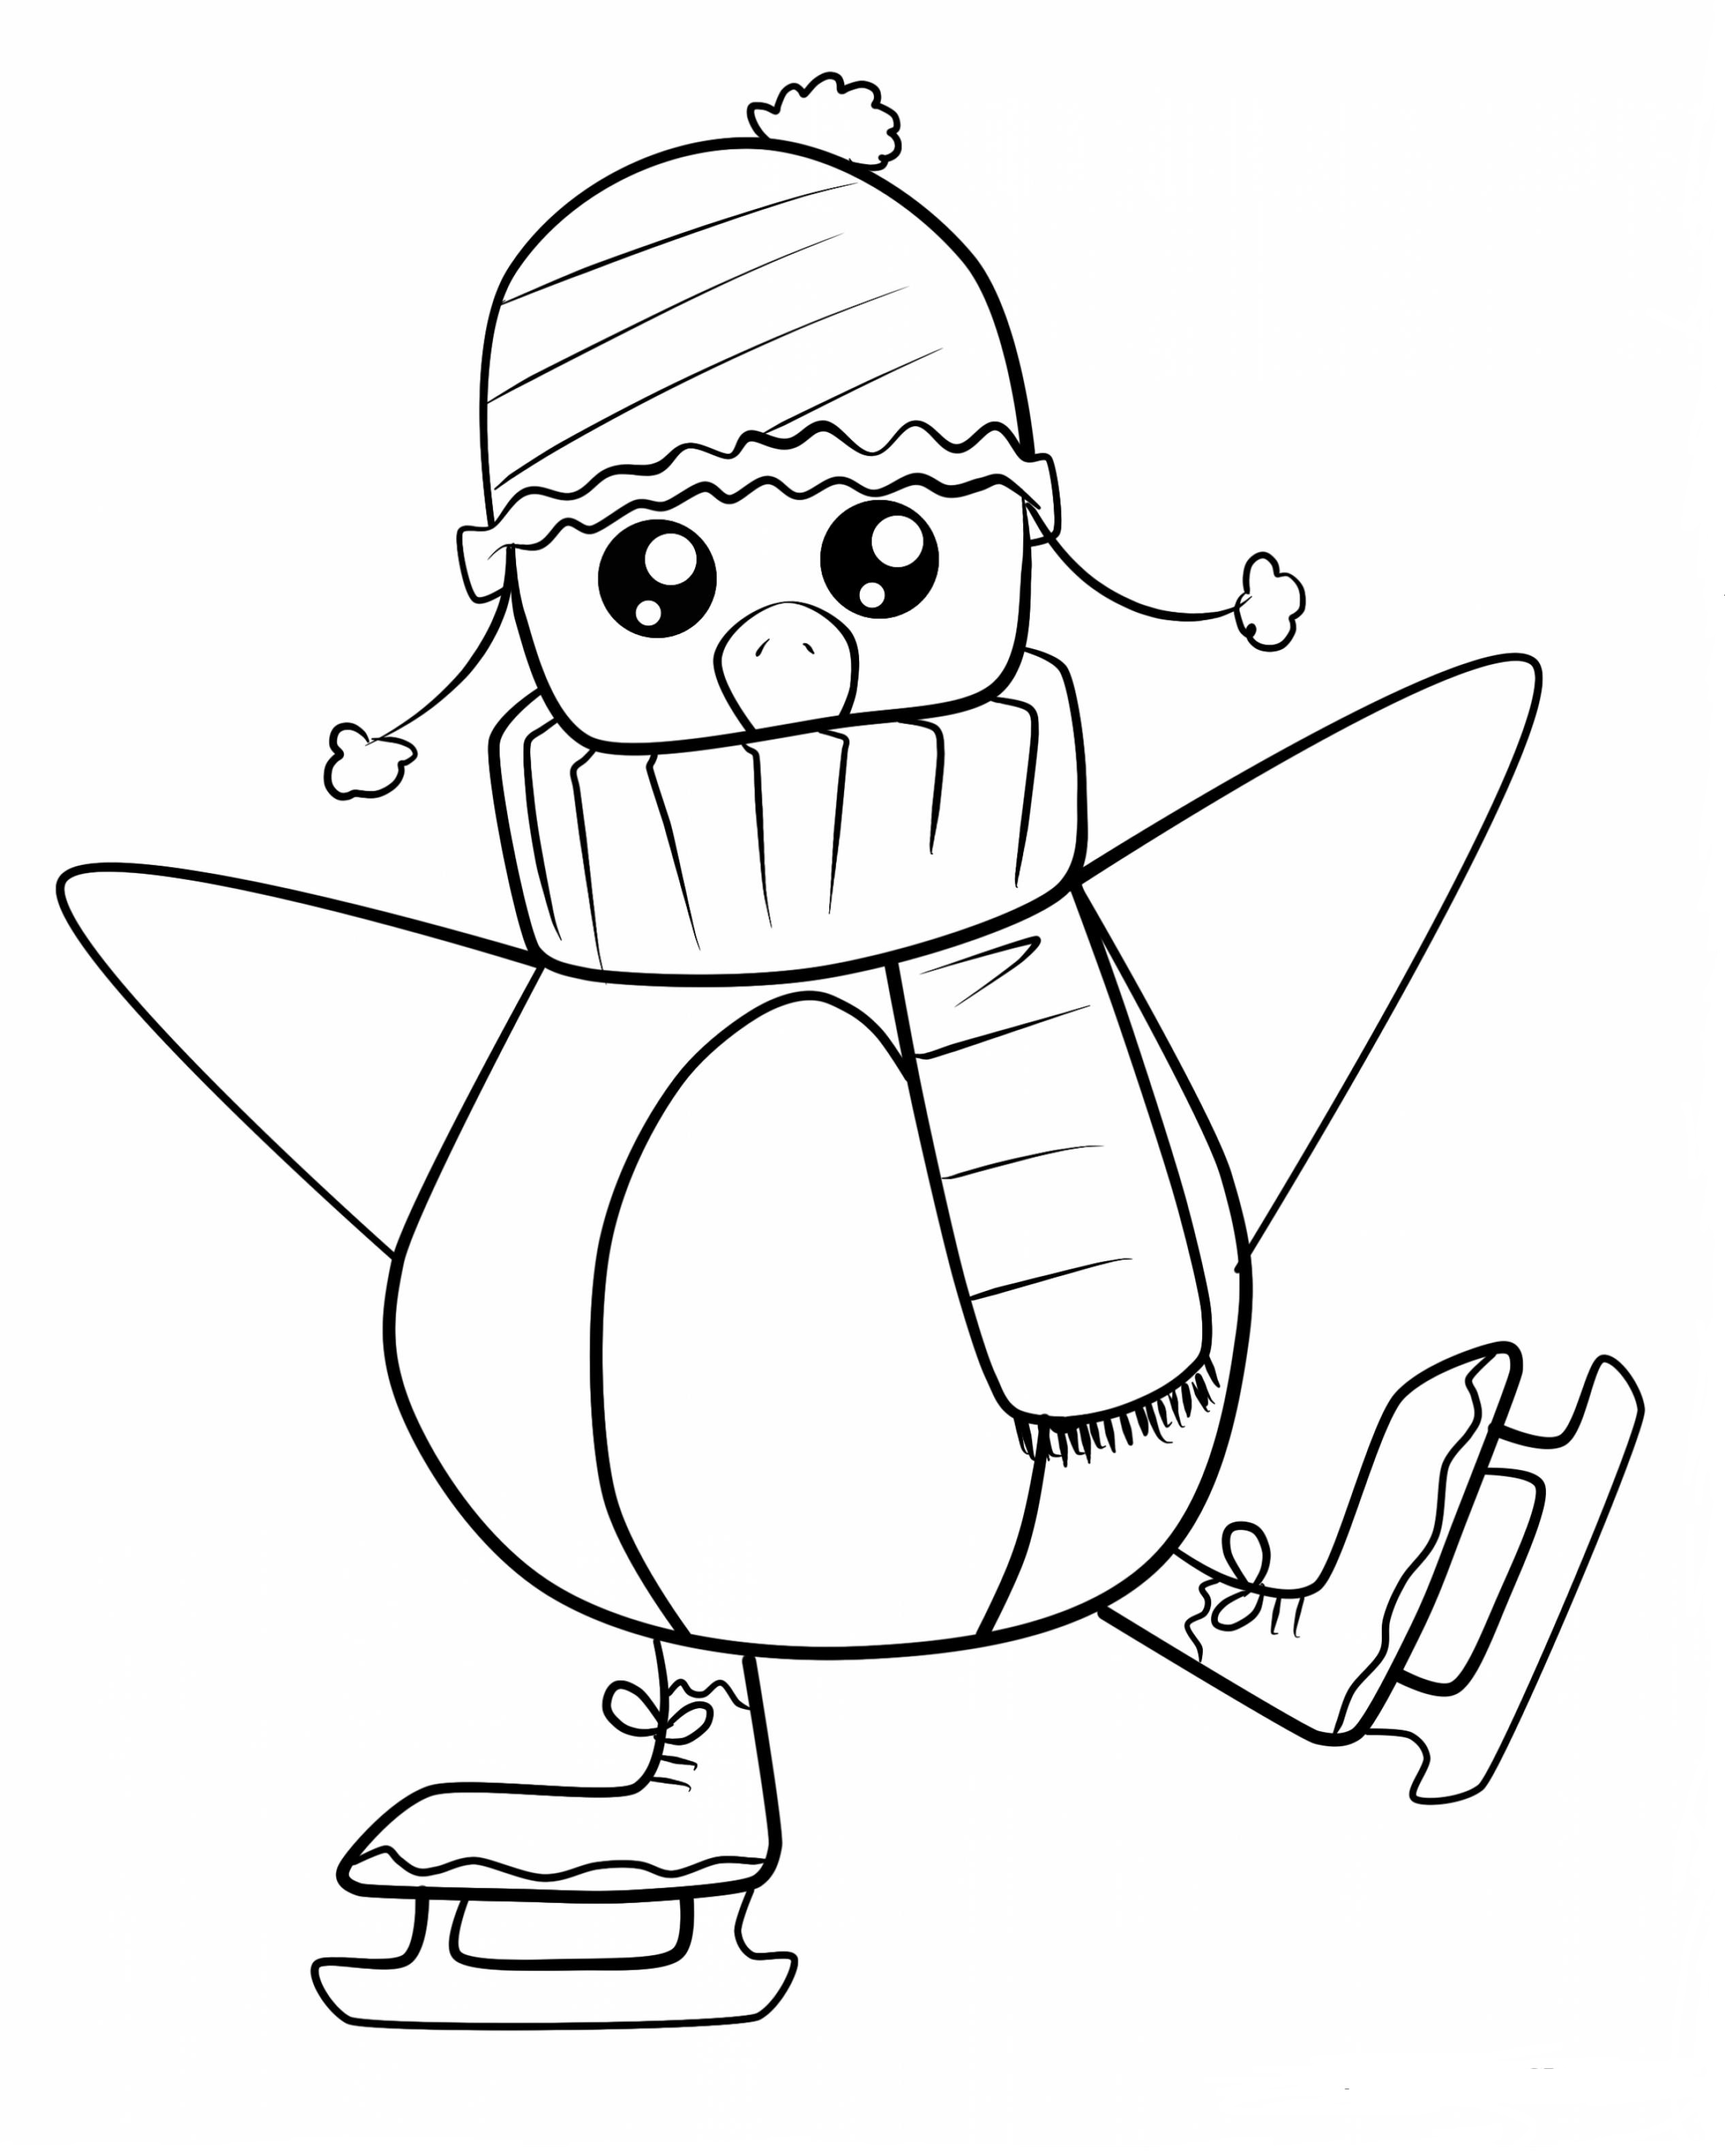 Penguin Ice Skating Coloring Page - Free Printable ...